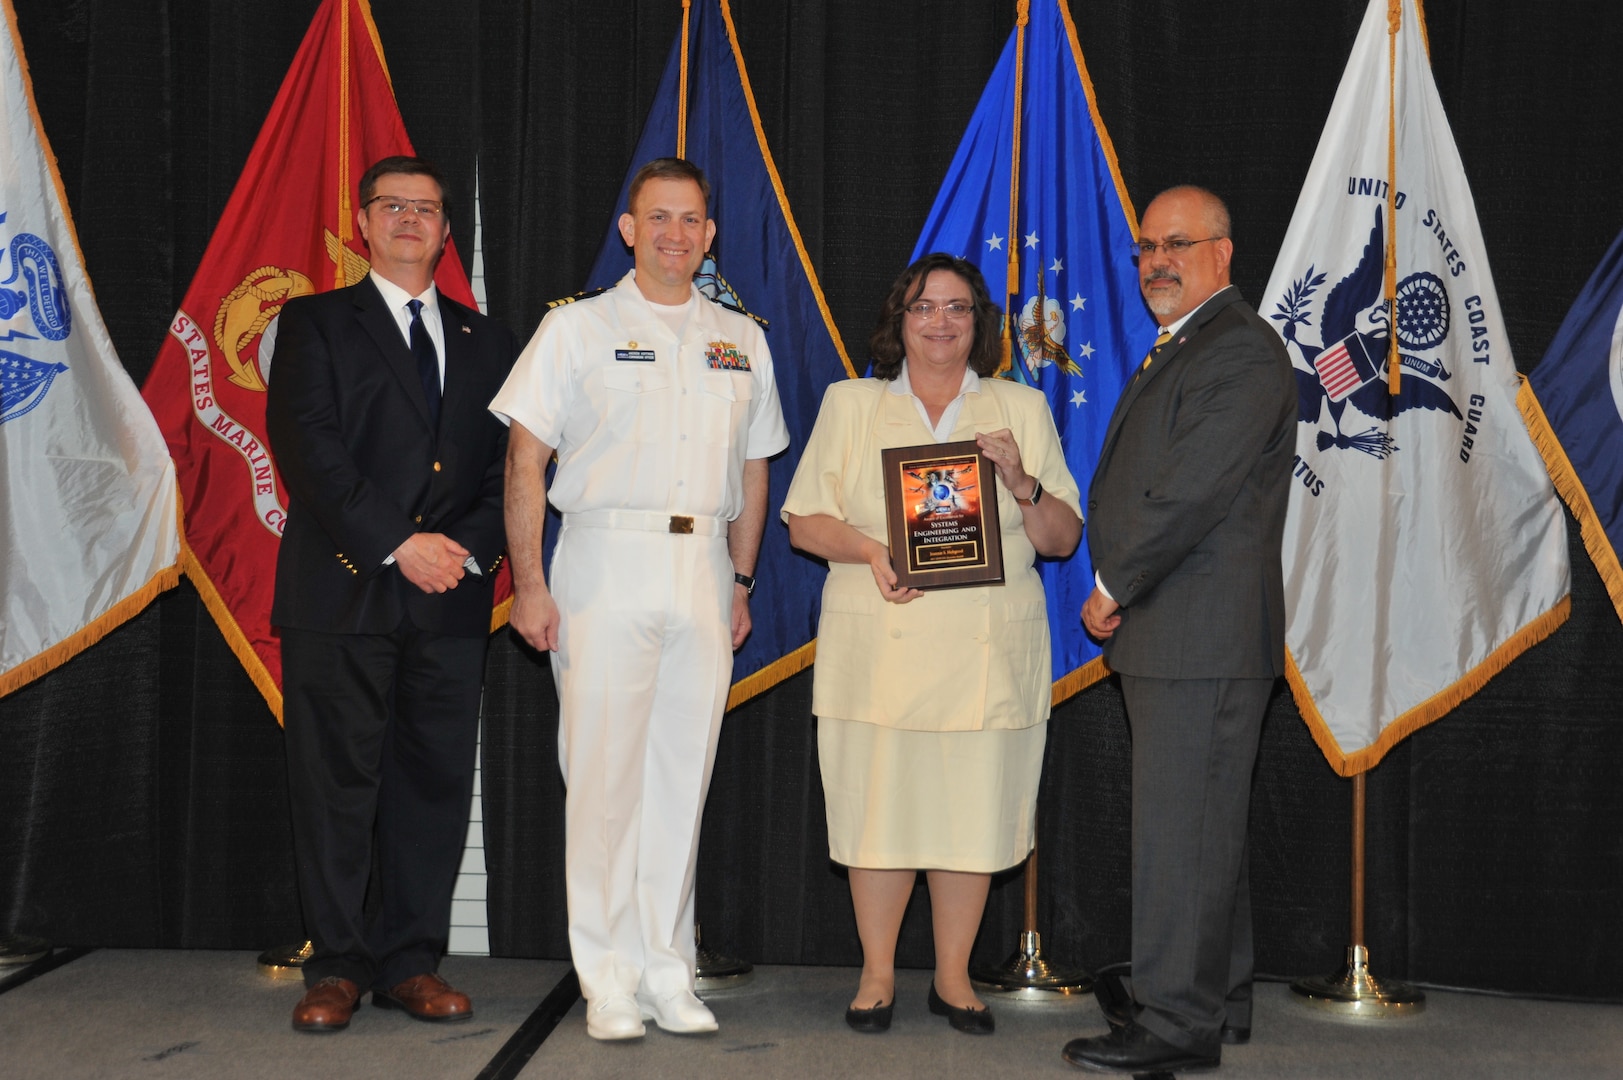 IMAGE: Jeannie Hobgood is presented the Award of Excellence for Systems Engineering and Integration at Naval Surface Warfare Center Dahlgren Division's annual awards ceremony, Apr. 26 at the Fredericksburg Expo and Conference Center.

The Award of Excellence for Systems Engineering and Integration was established to recognize individuals who have made a notable and significant impact to NSWCDD through their outstanding performance in systems engineering and integration.